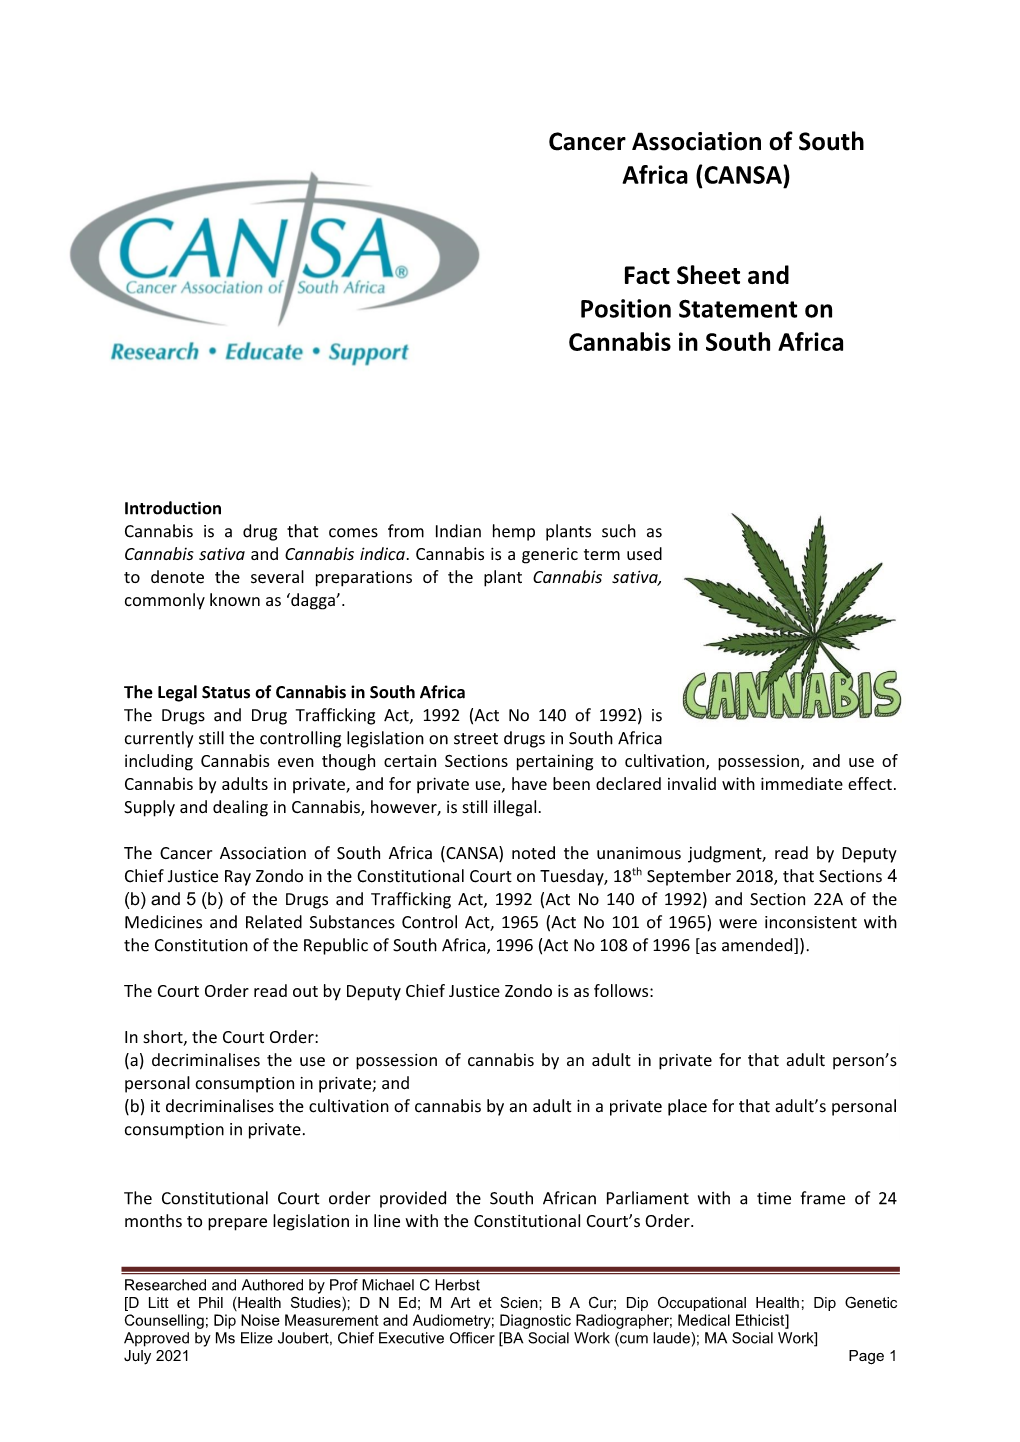 (CANSA) Fact Sheet and Position Statement on Cannabis in South